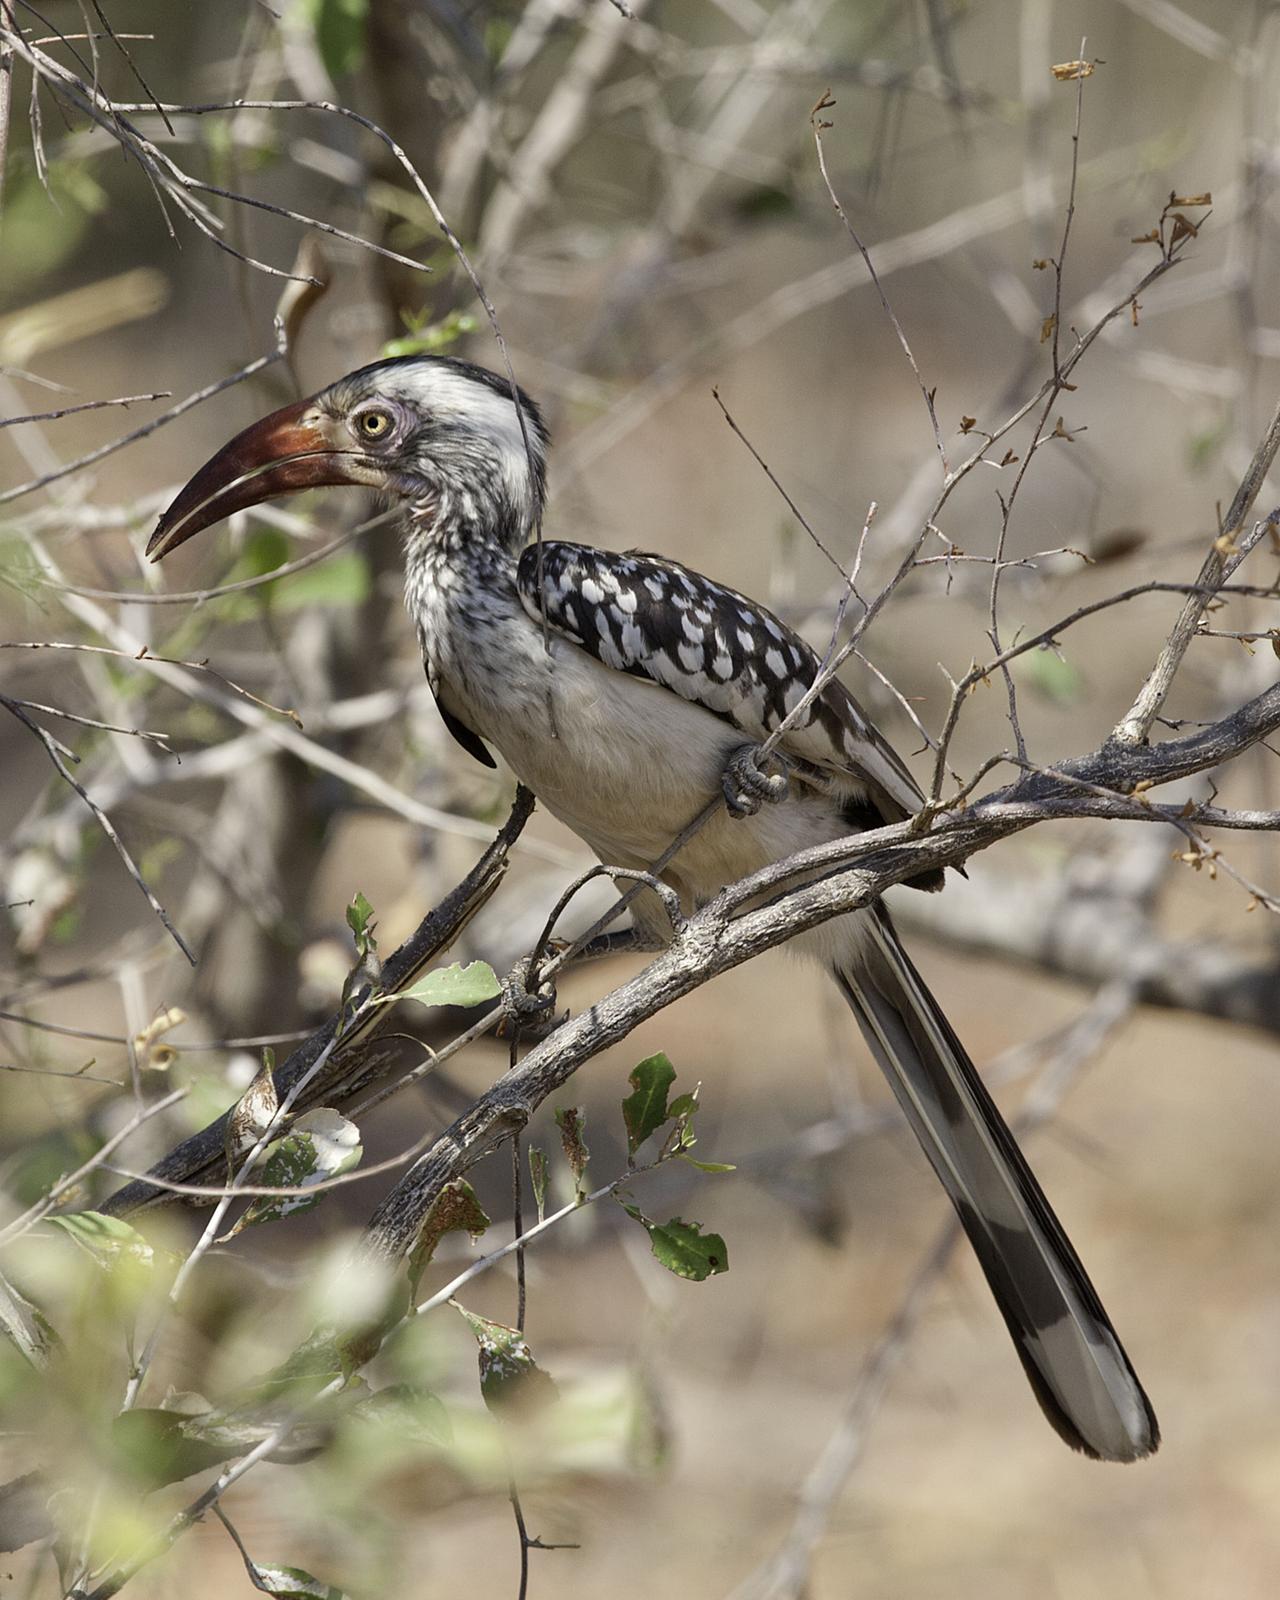 Southern Red-billed Hornbill Photo by Mary Ann Melton